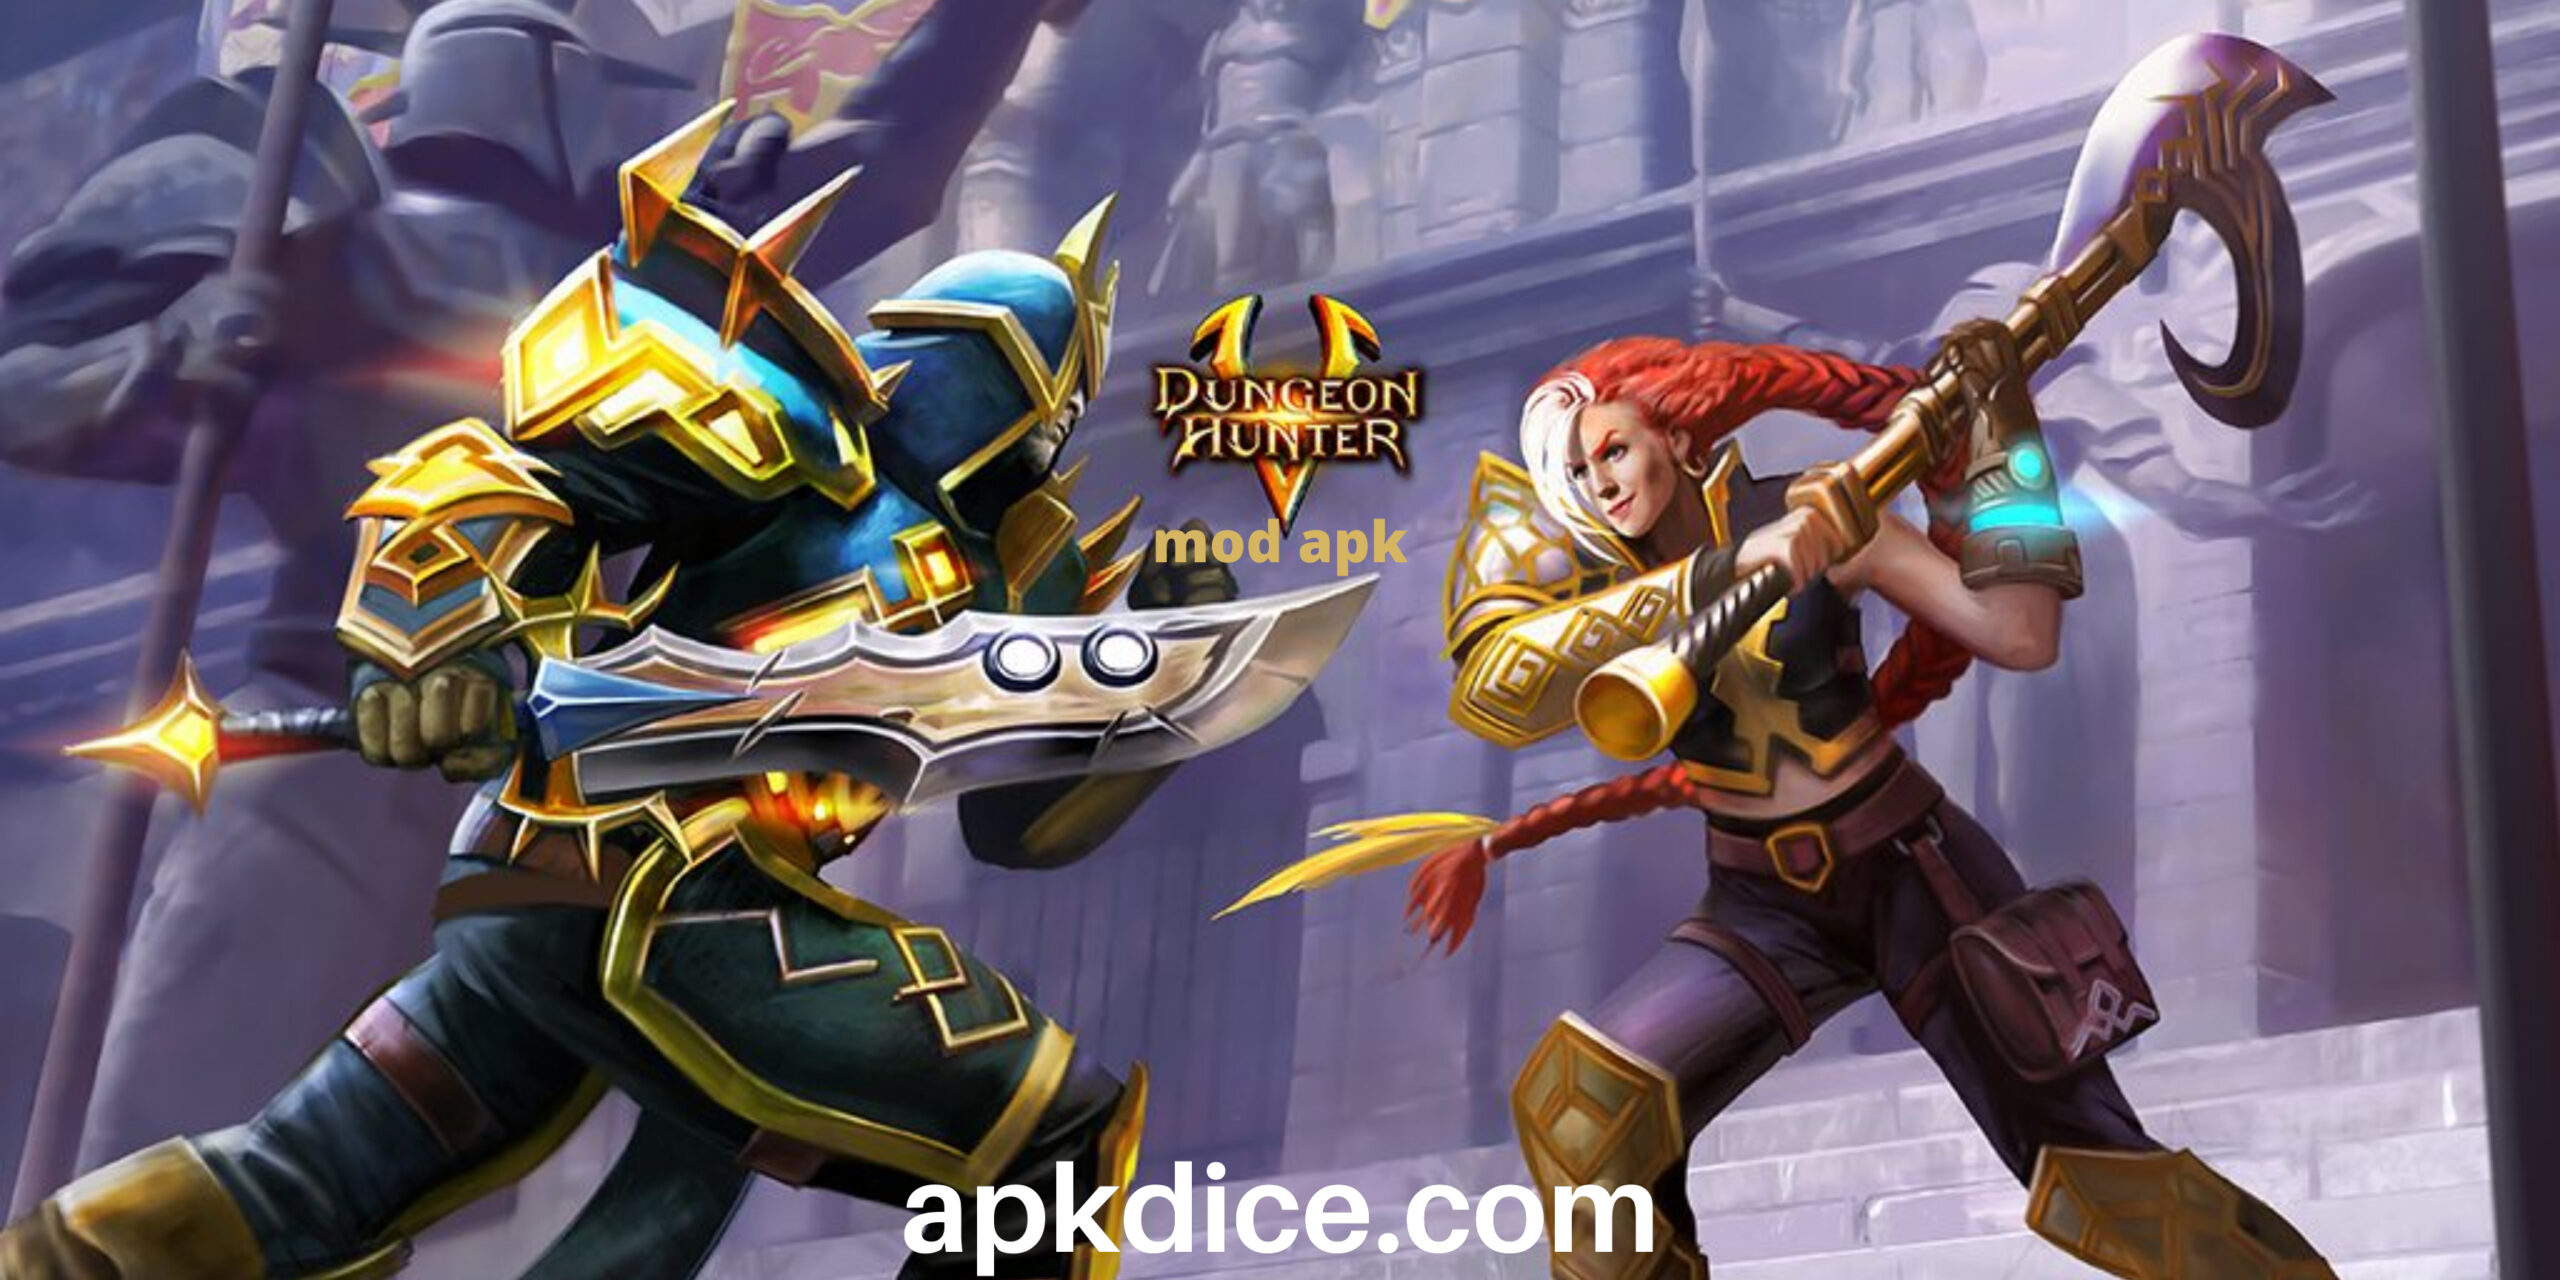 Dungeon Hunter 5 Mod Apk (Unlimited Gems And Money) 1